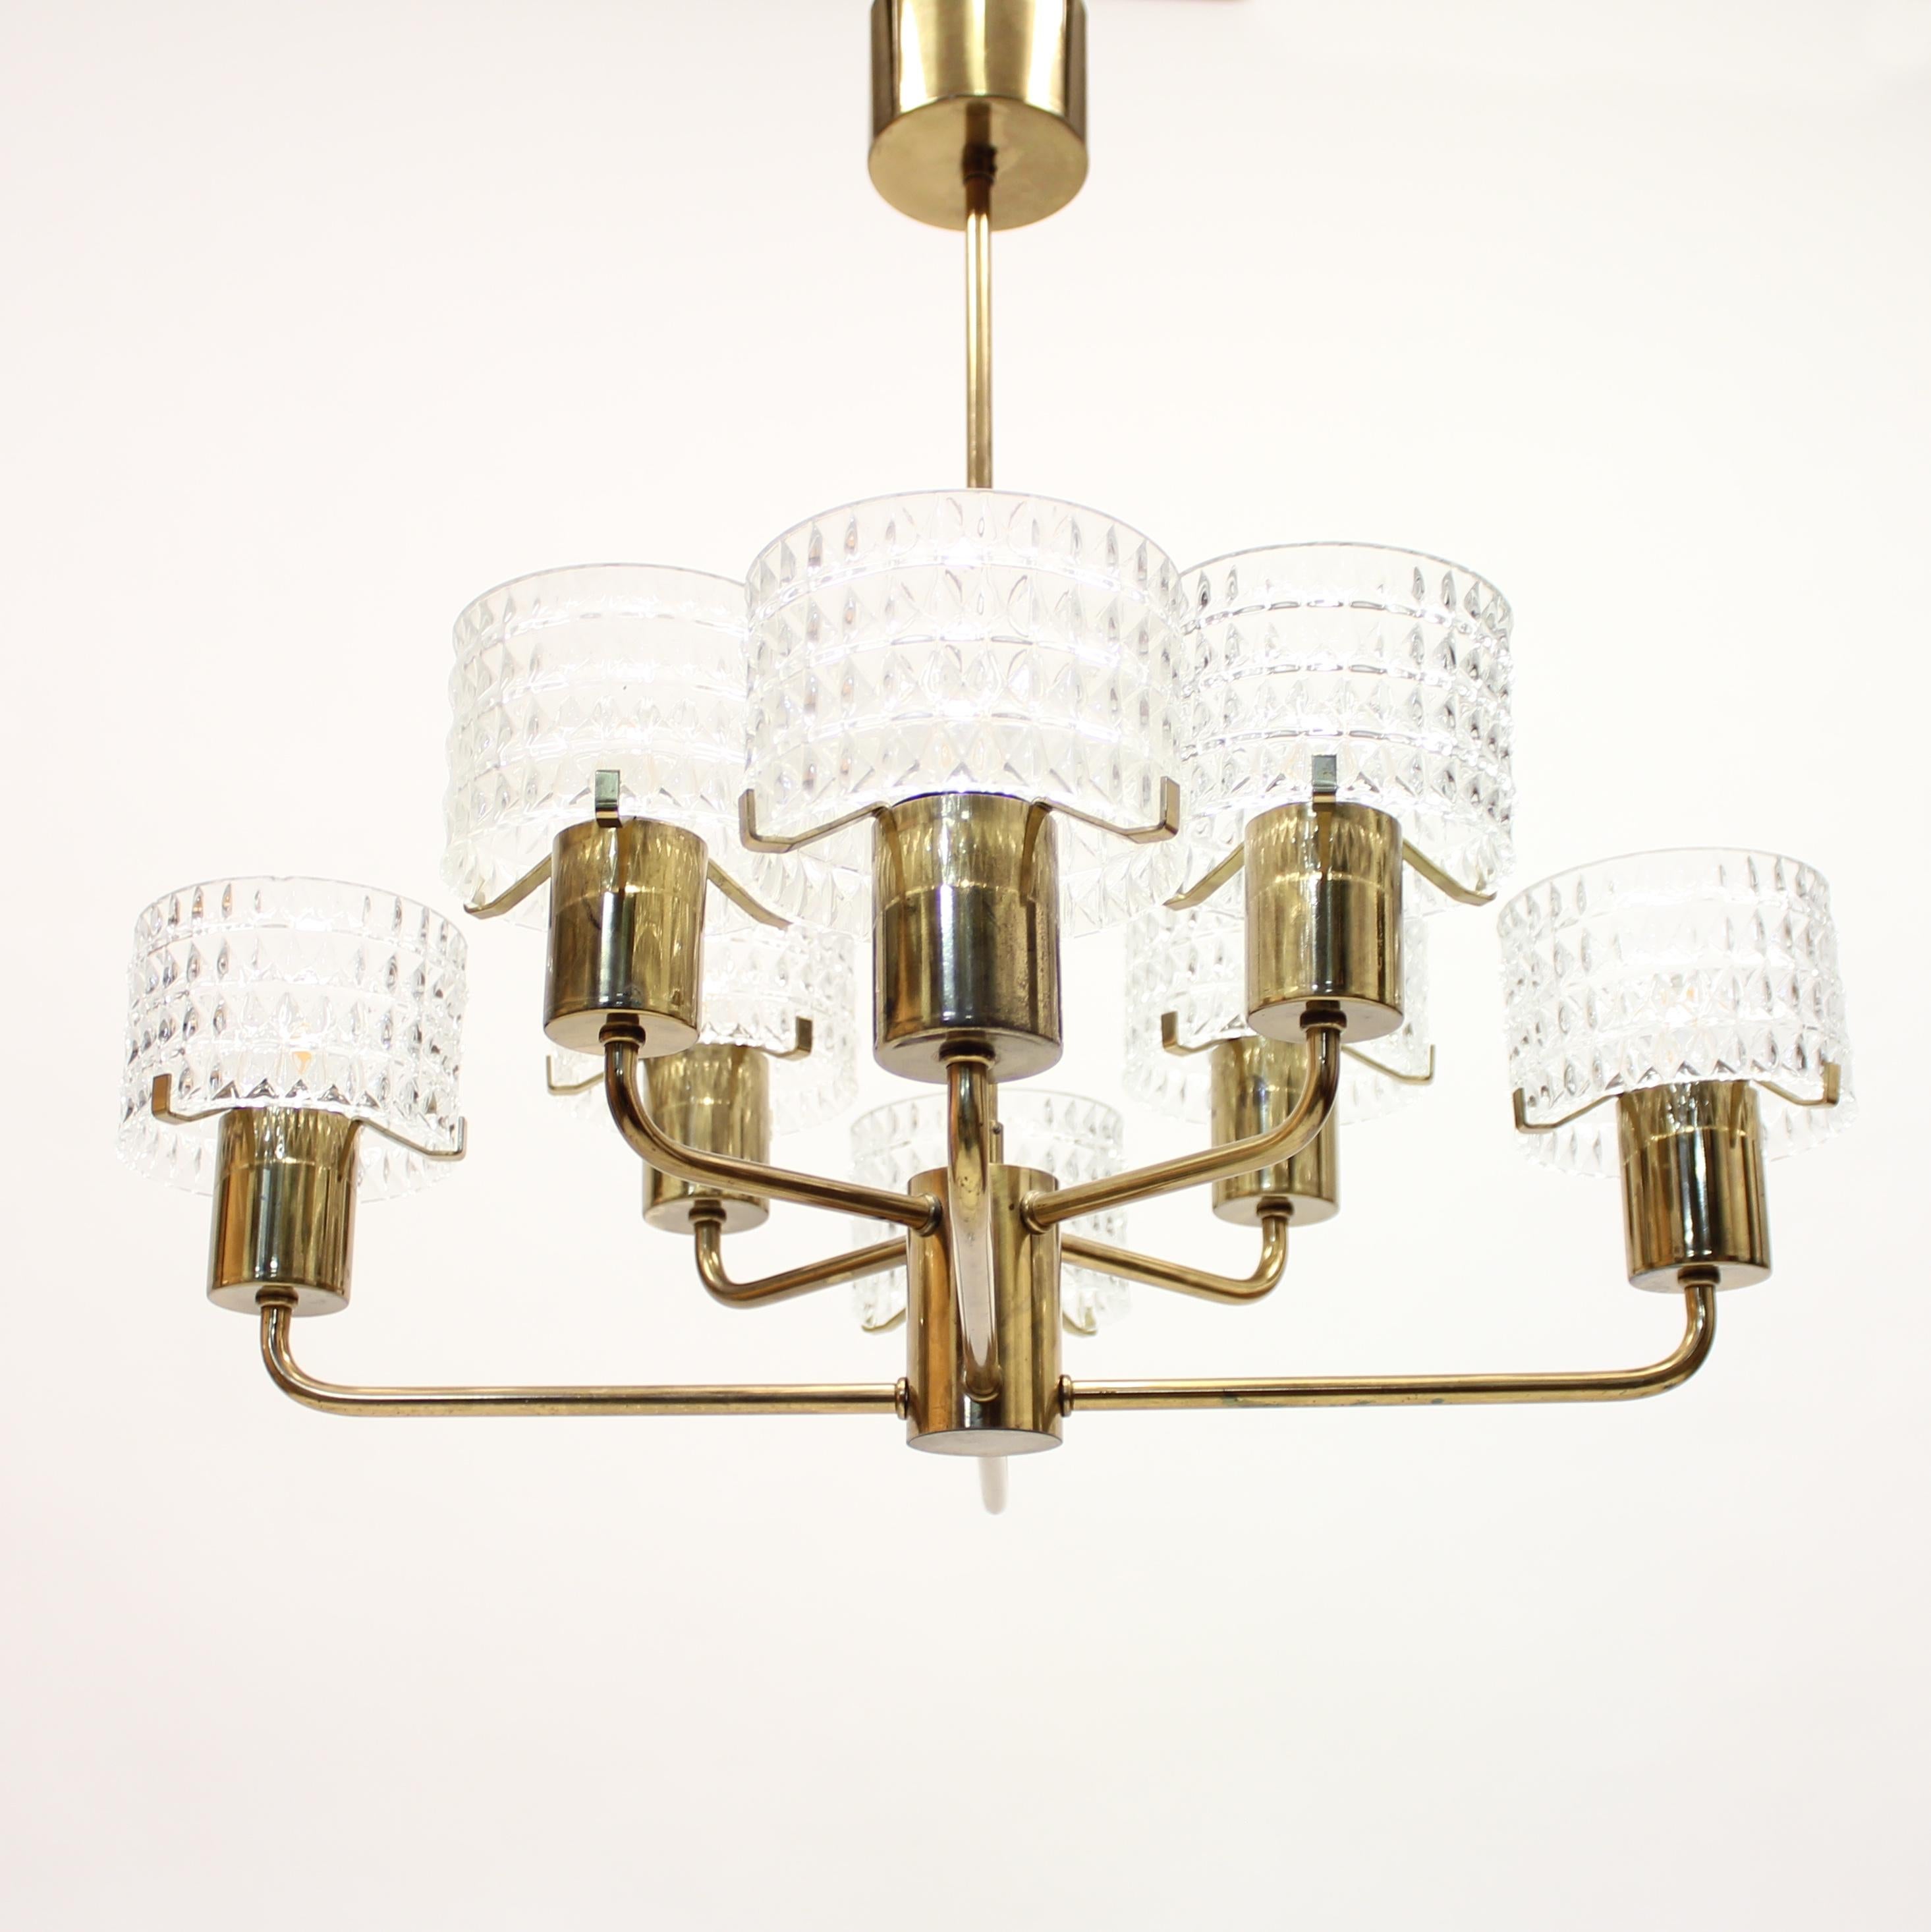 8-light brass chandelier with glass shades made in Sweden in the 1960s. The shades rests on three brass holders that sits on top of every lamp holder. An extra glass shade is included and is a good thing if one of the shades should break. It also